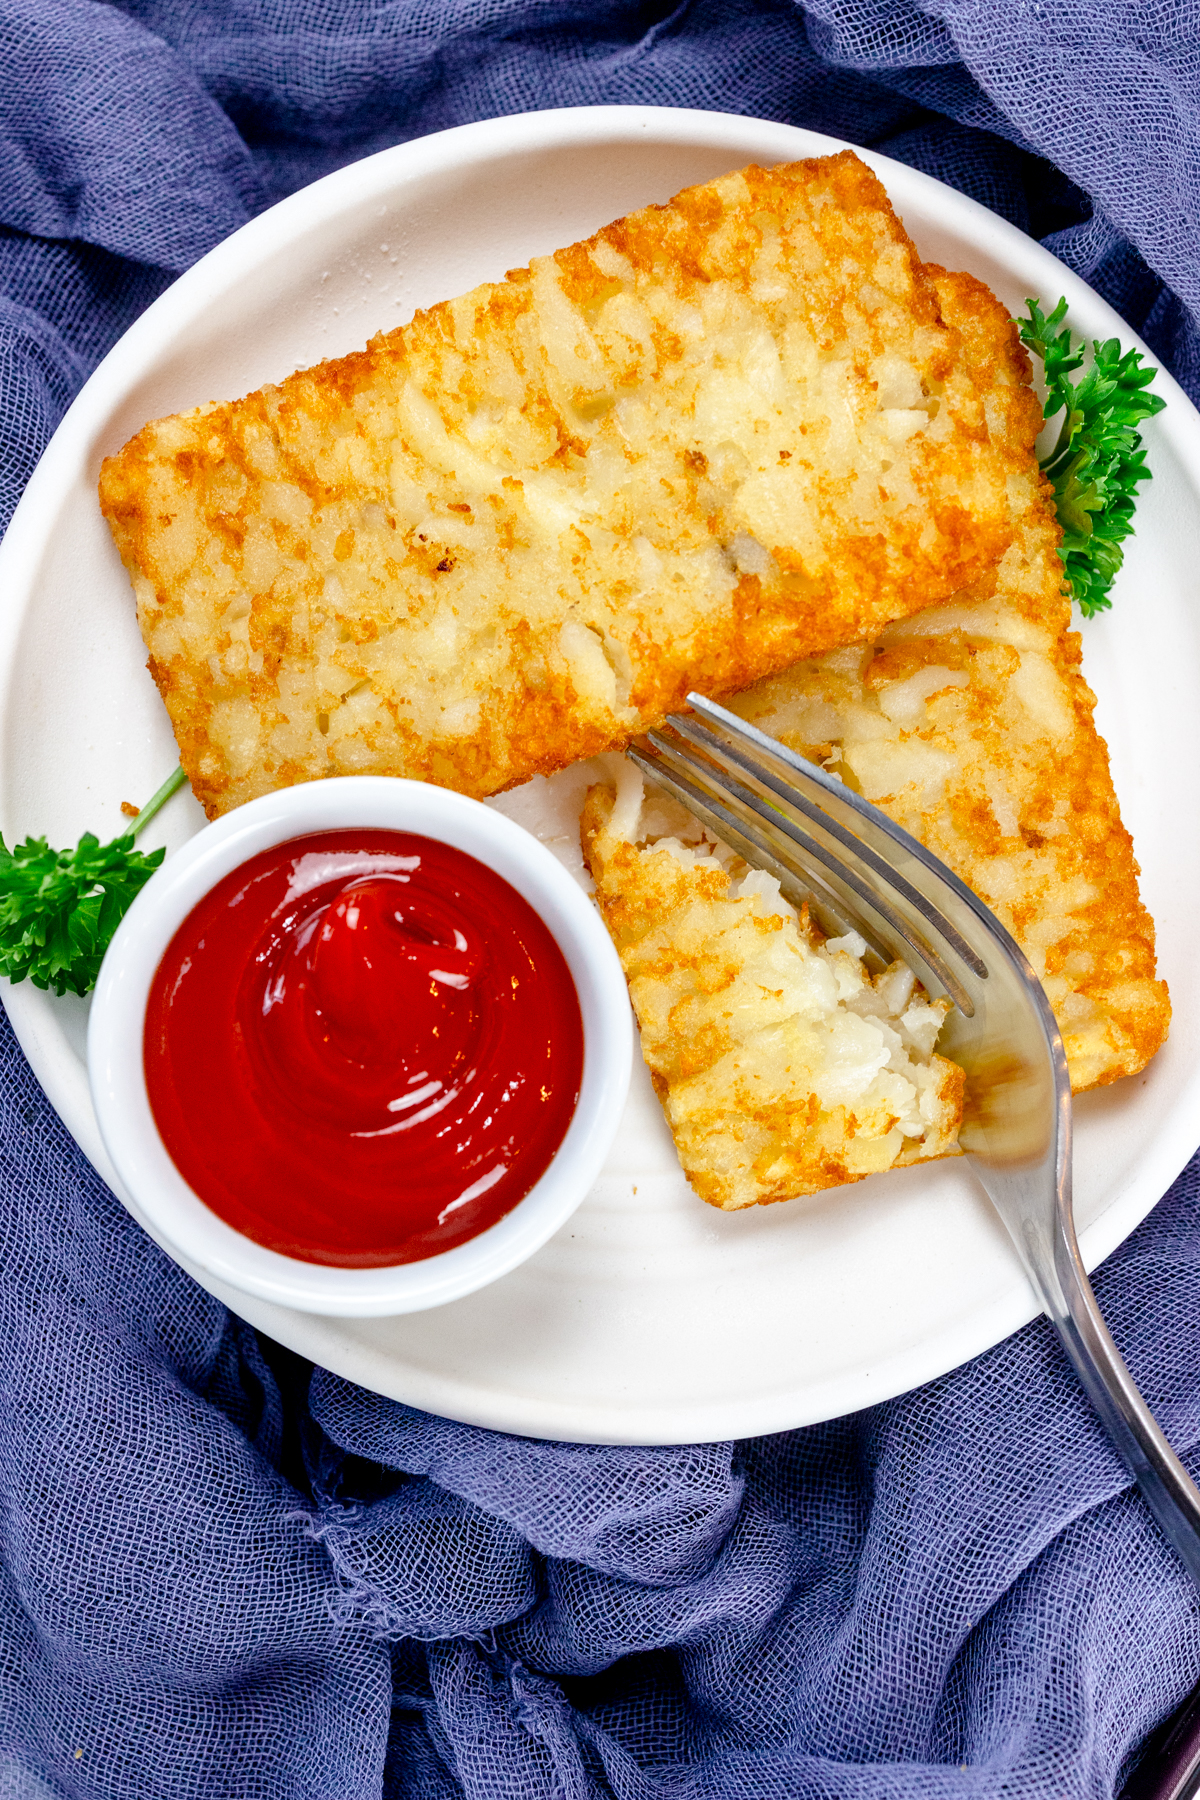 Top view of air fried hash browns on a white plate with leafy green garnish, a fork cutting one of the hash browns, and a small dipping pot of tomato sauce.